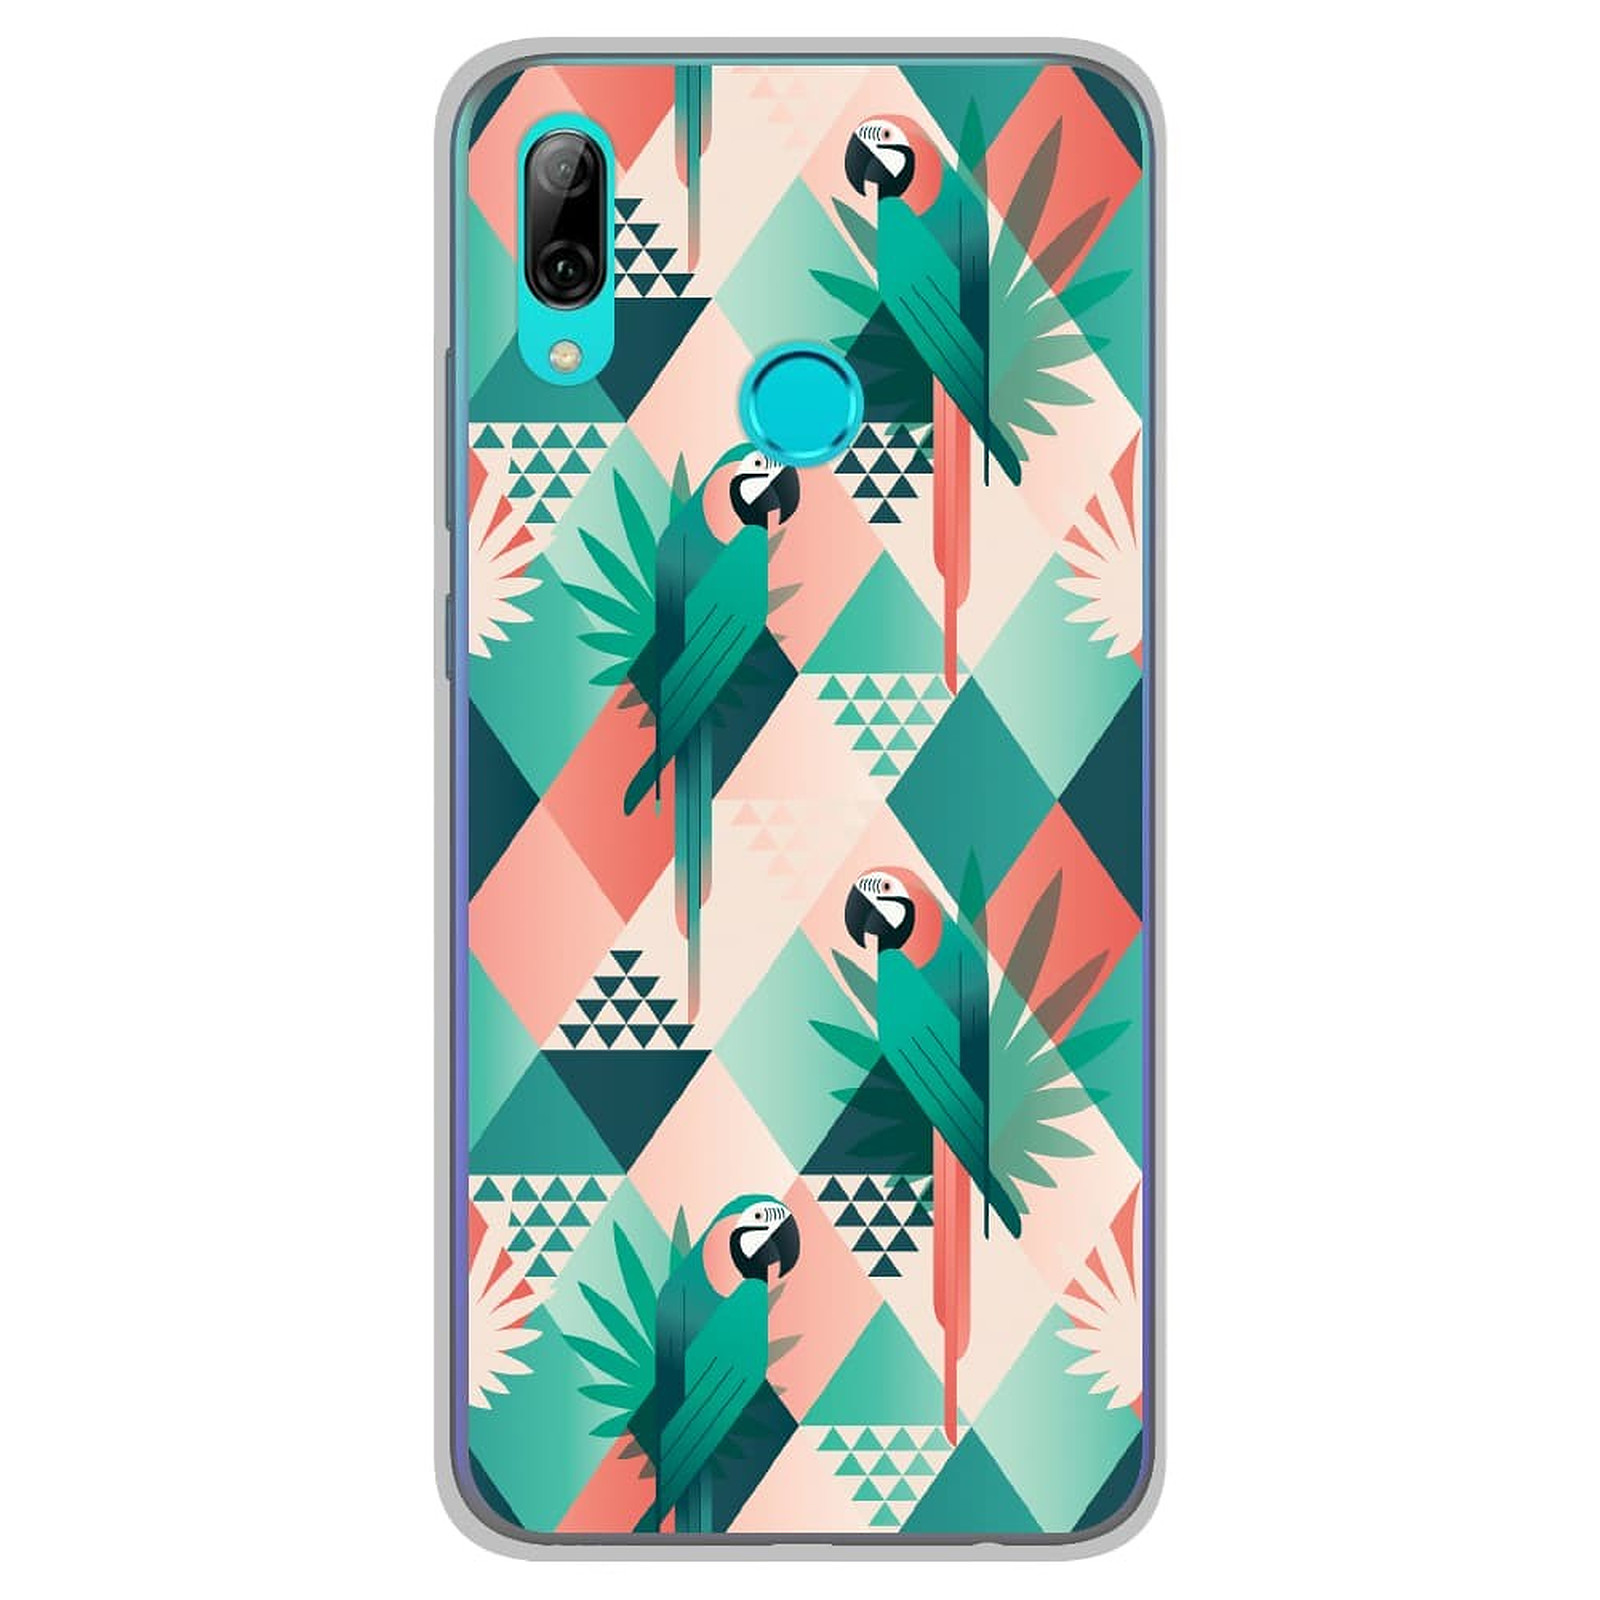 1001 Coques Coque silicone gel Huawei P Smart 2019 motif Perroquet ge´ome´trique - Coque telephone 1001Coques